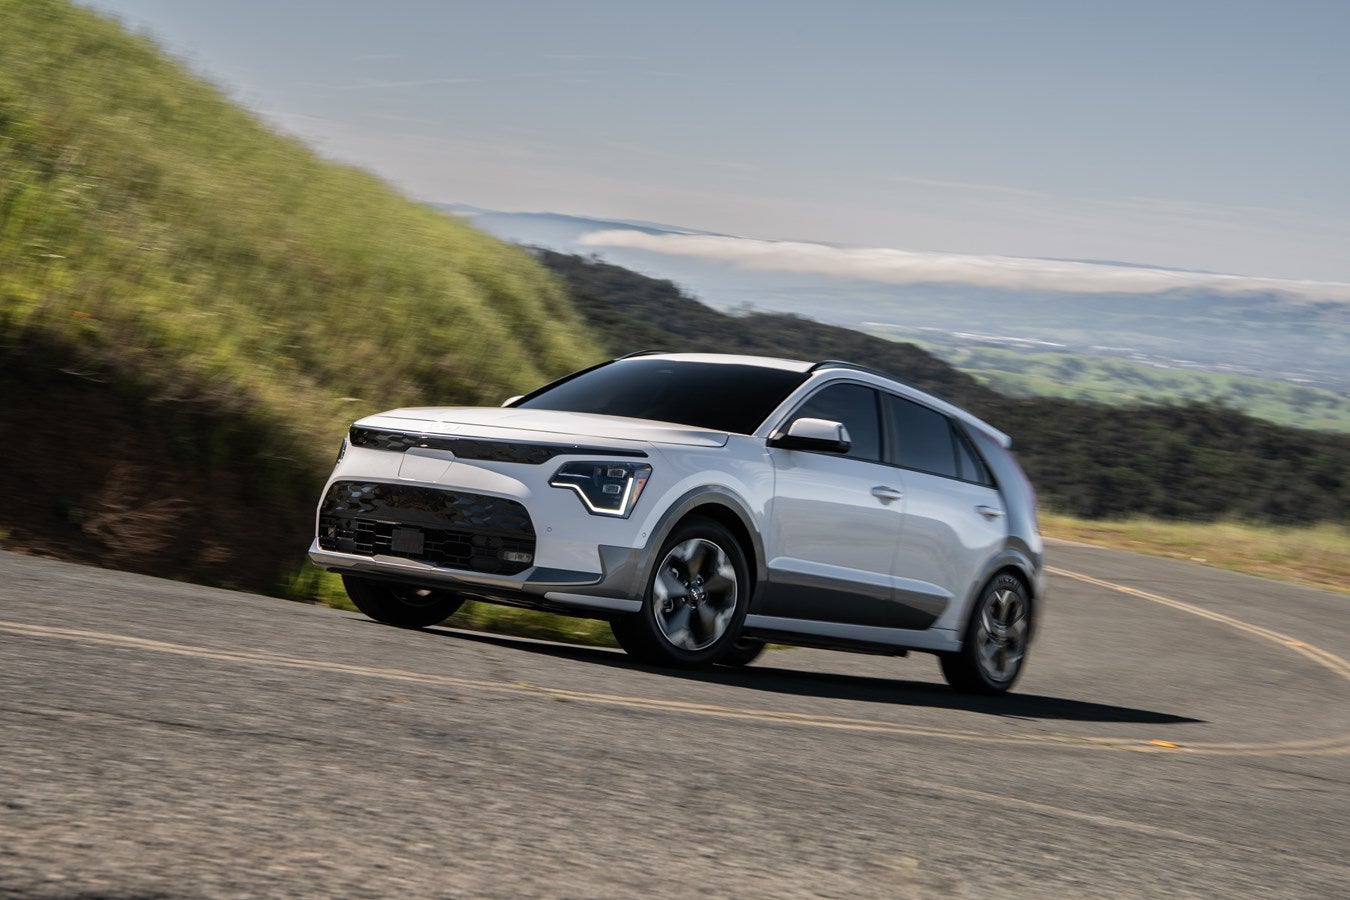 I Traveled To The Santa Ynez Valley To Test Kia’s 2023 Fleet Of Electric Cars, And It Was One Of The Best Road Trips I’ve Ever Experienced